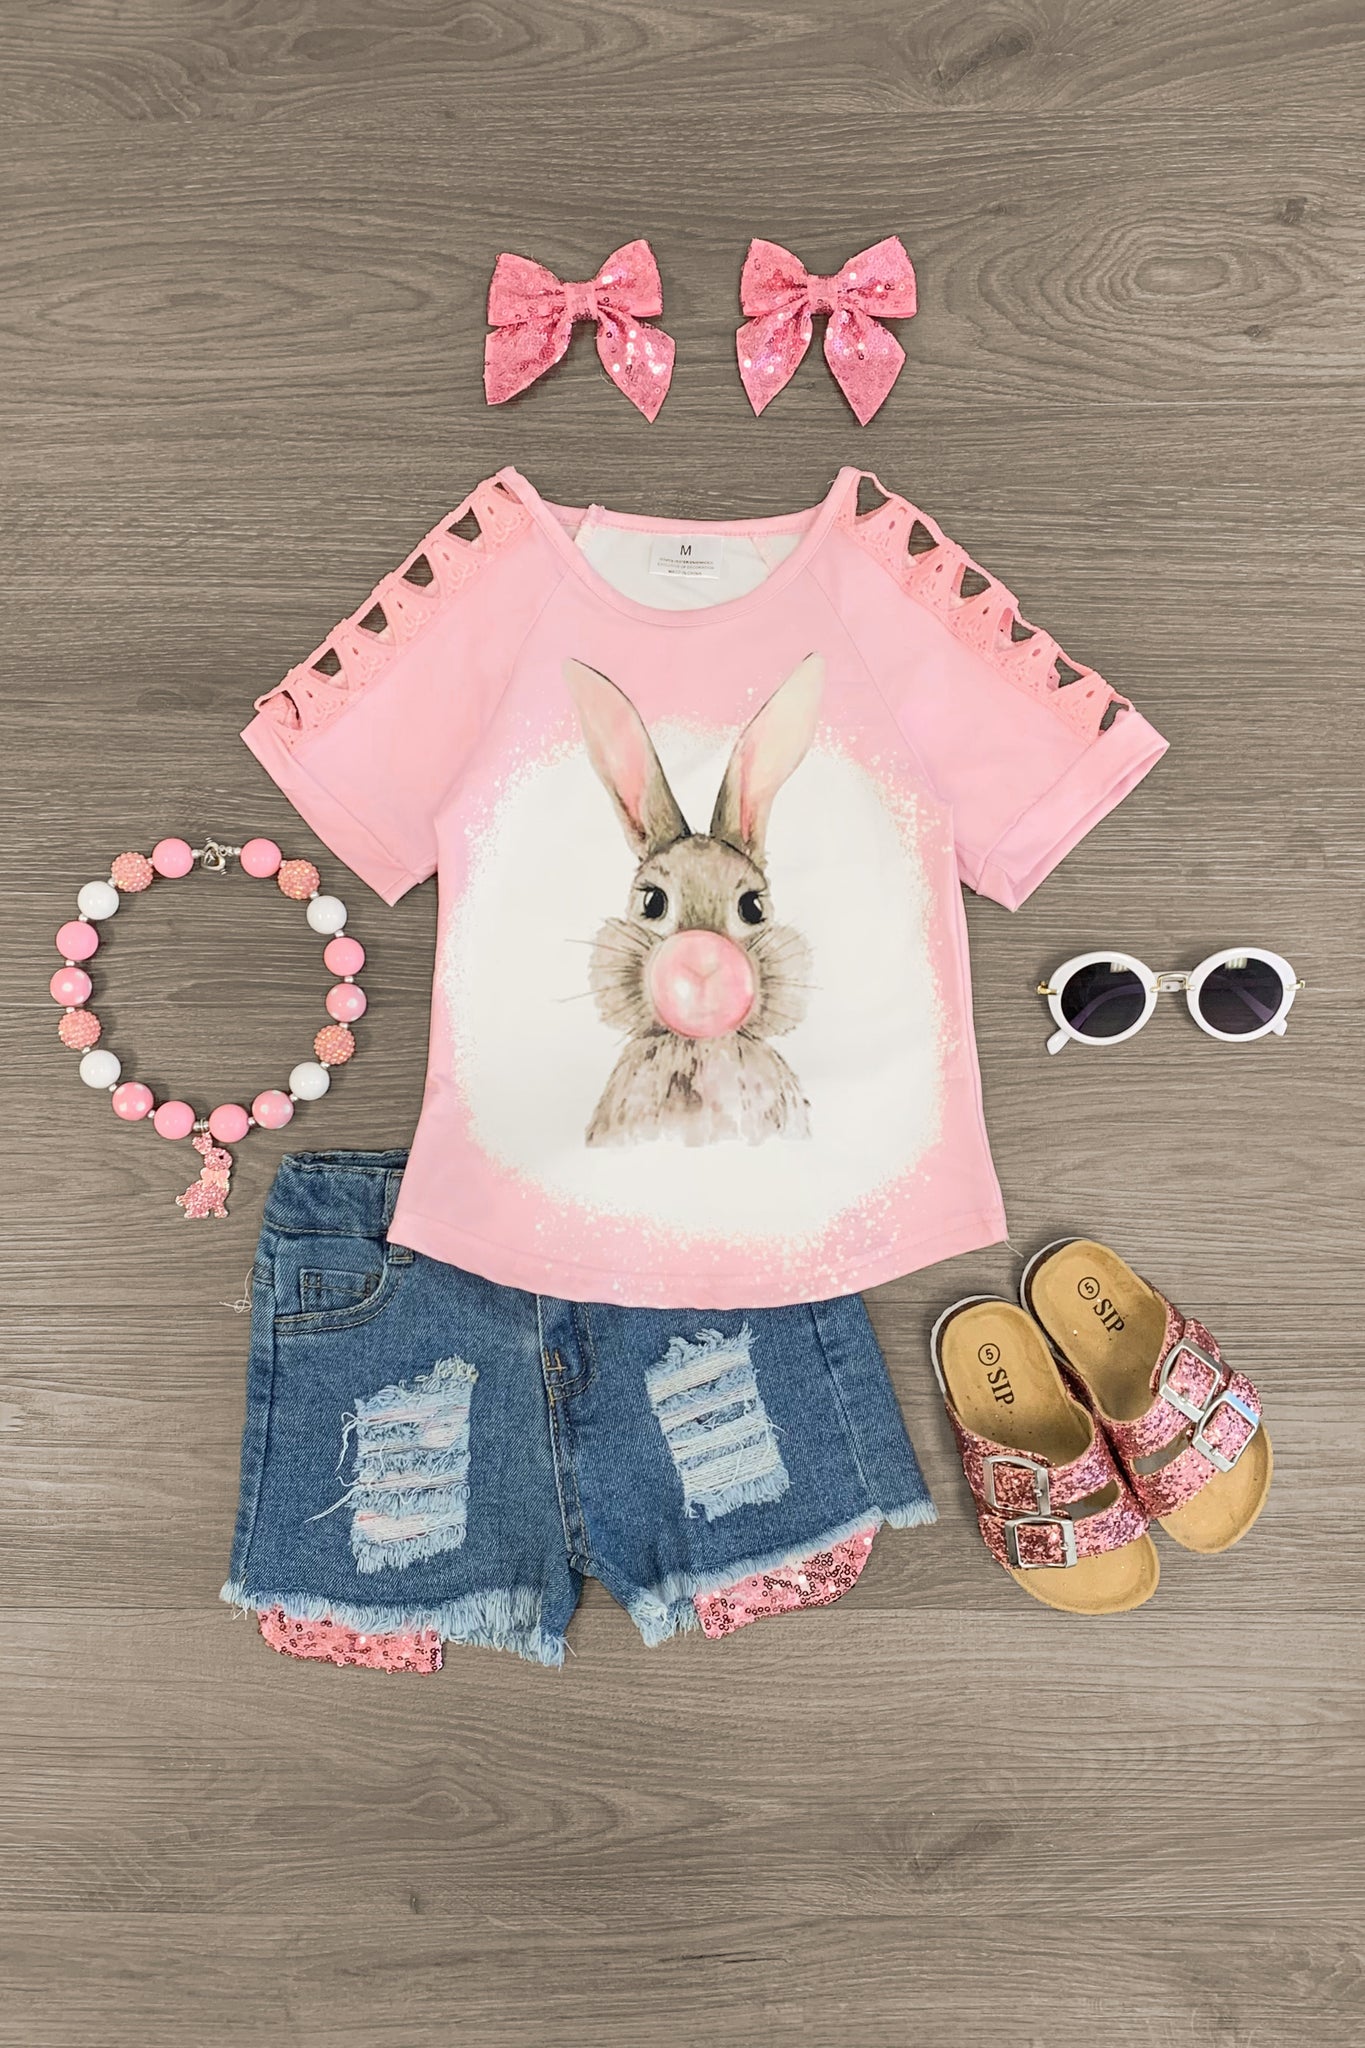 Children's Easter Clothing & Accessories